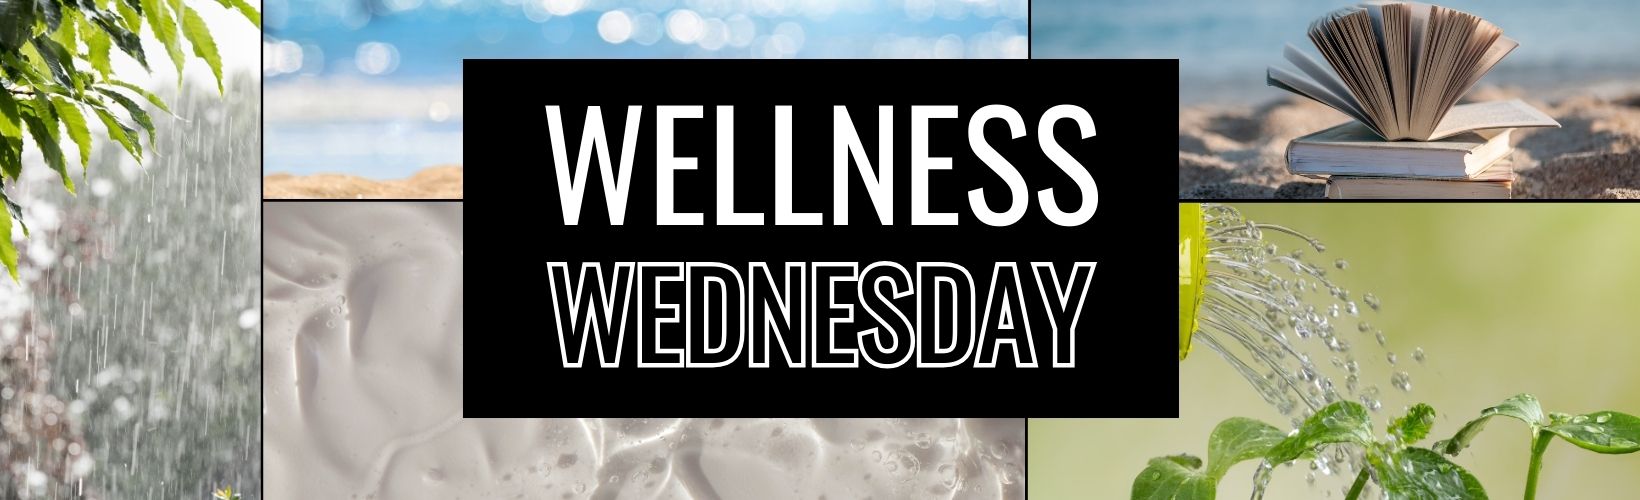 Wellness Wednesday: How to Make Healthy Snacks That Satisfy Your Cravings